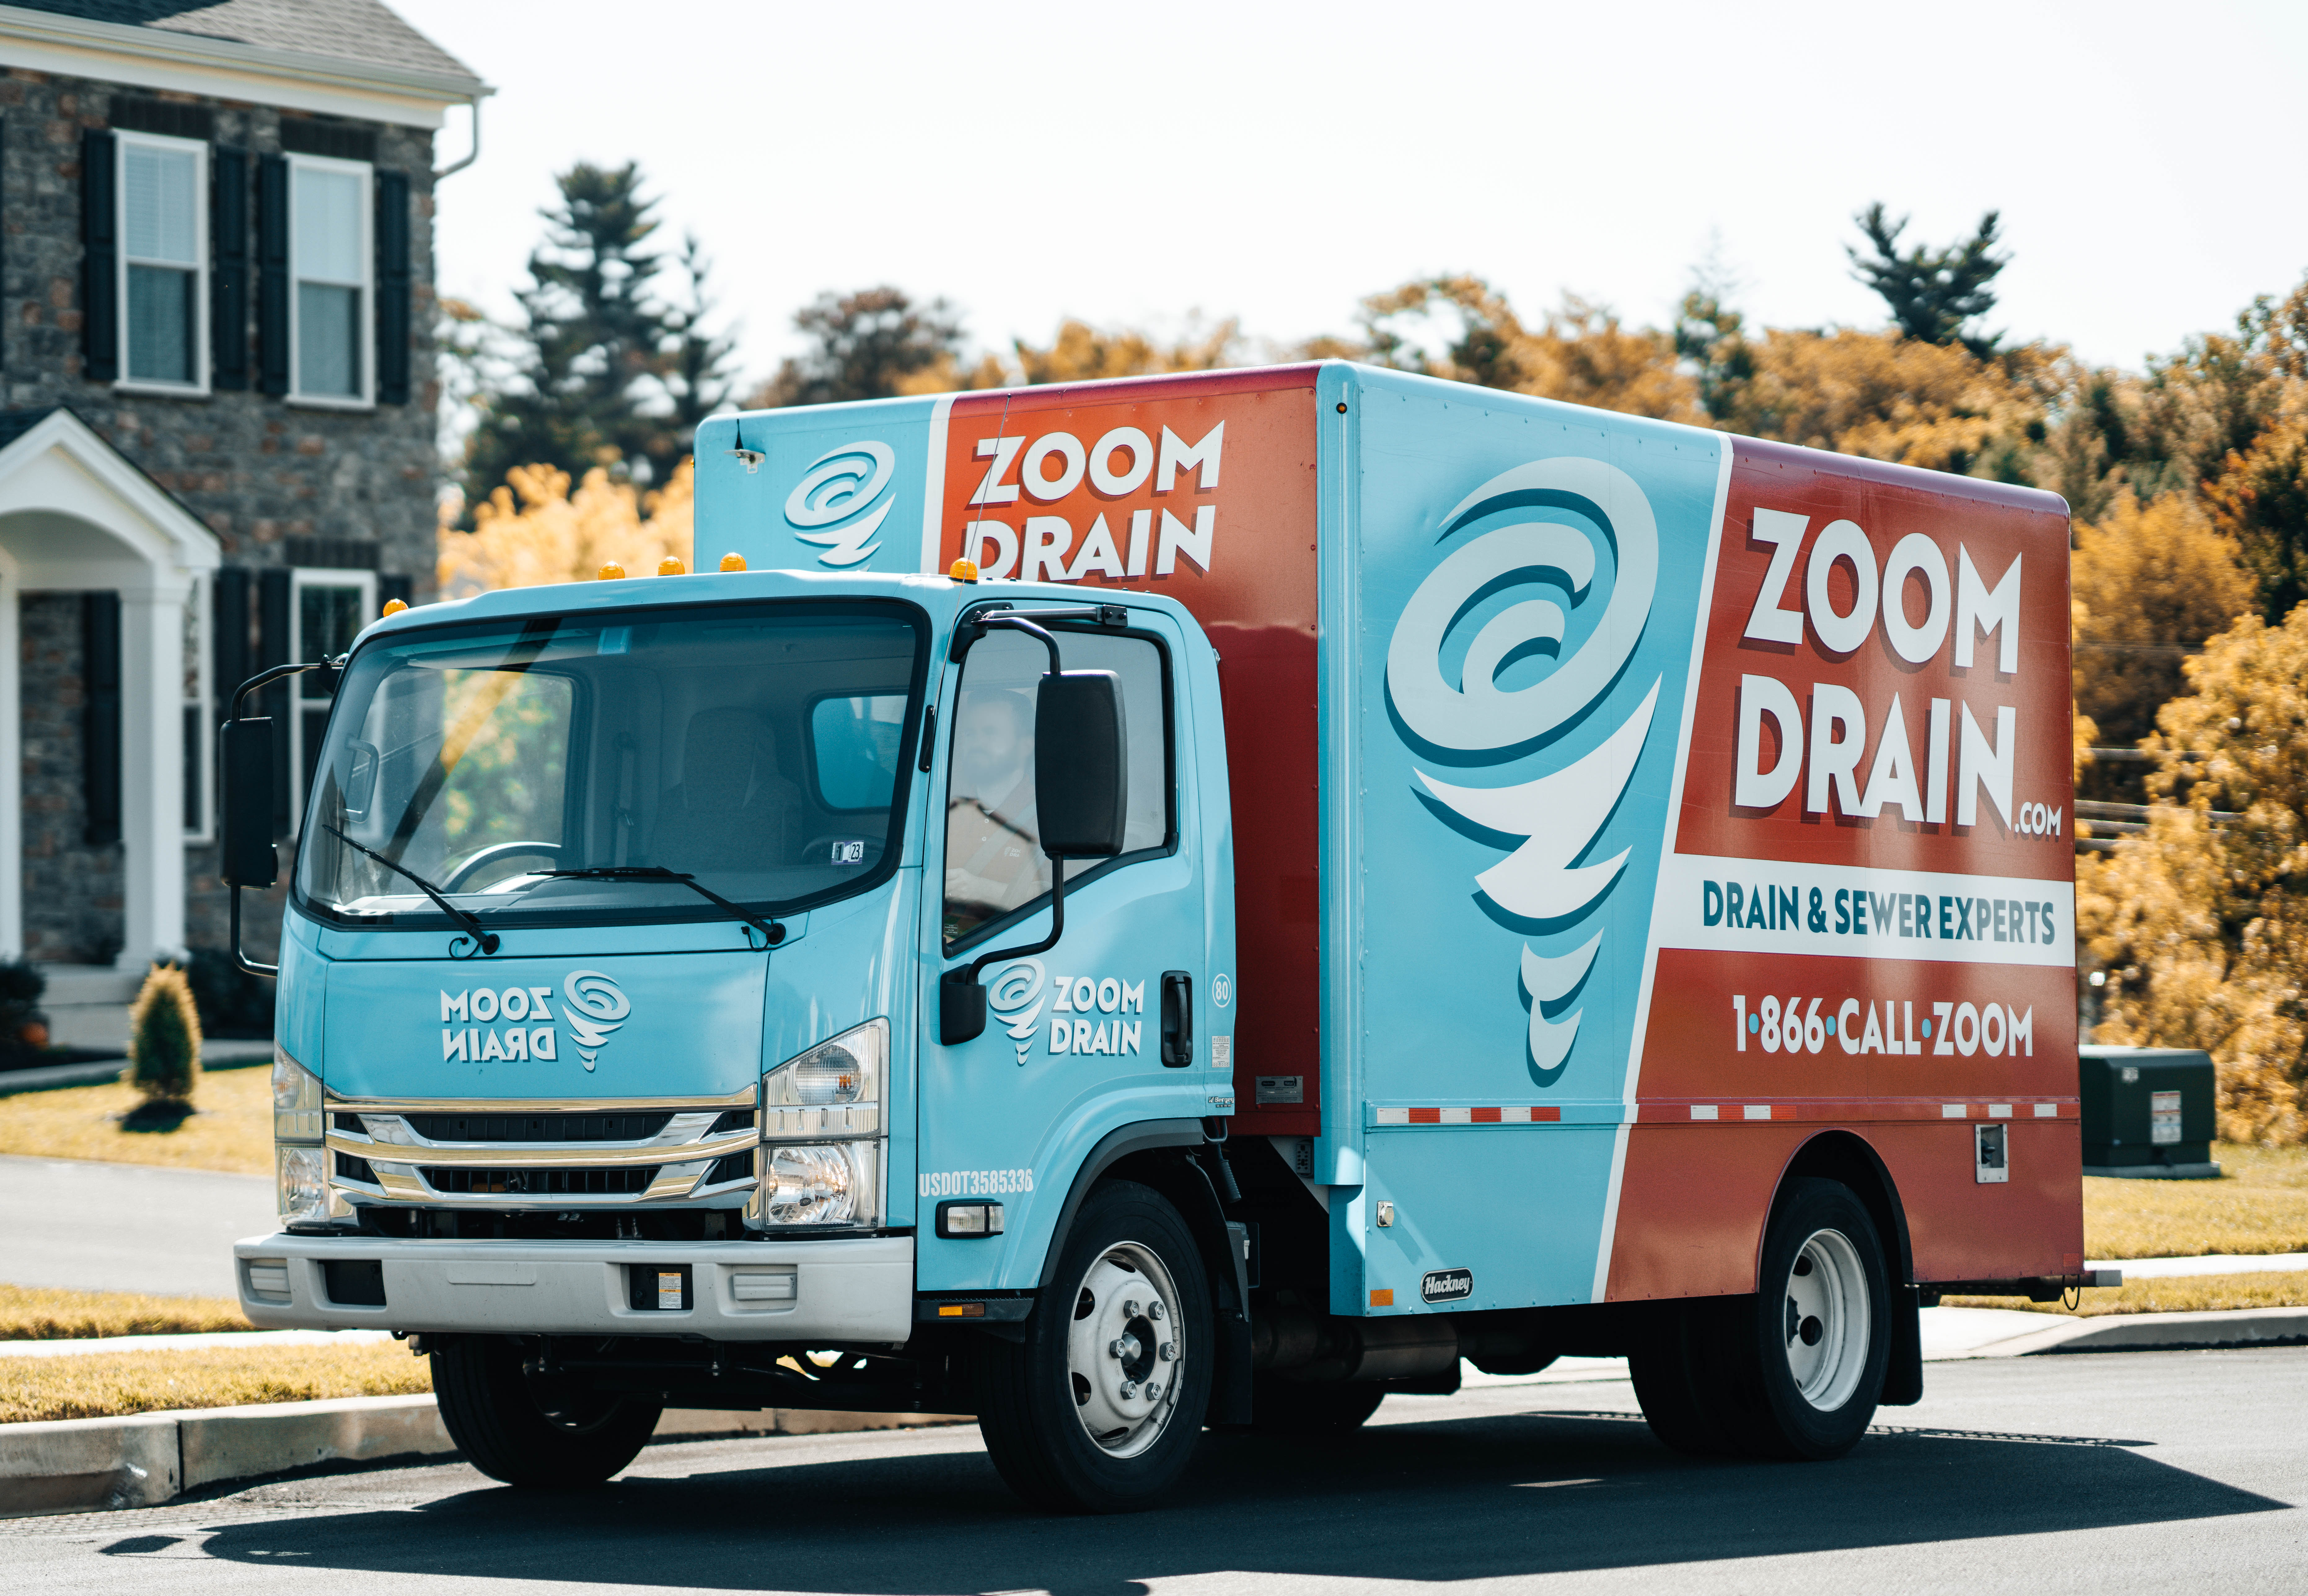 Now Open: Get To Know The Owners Of Zoom Drain South Florida!